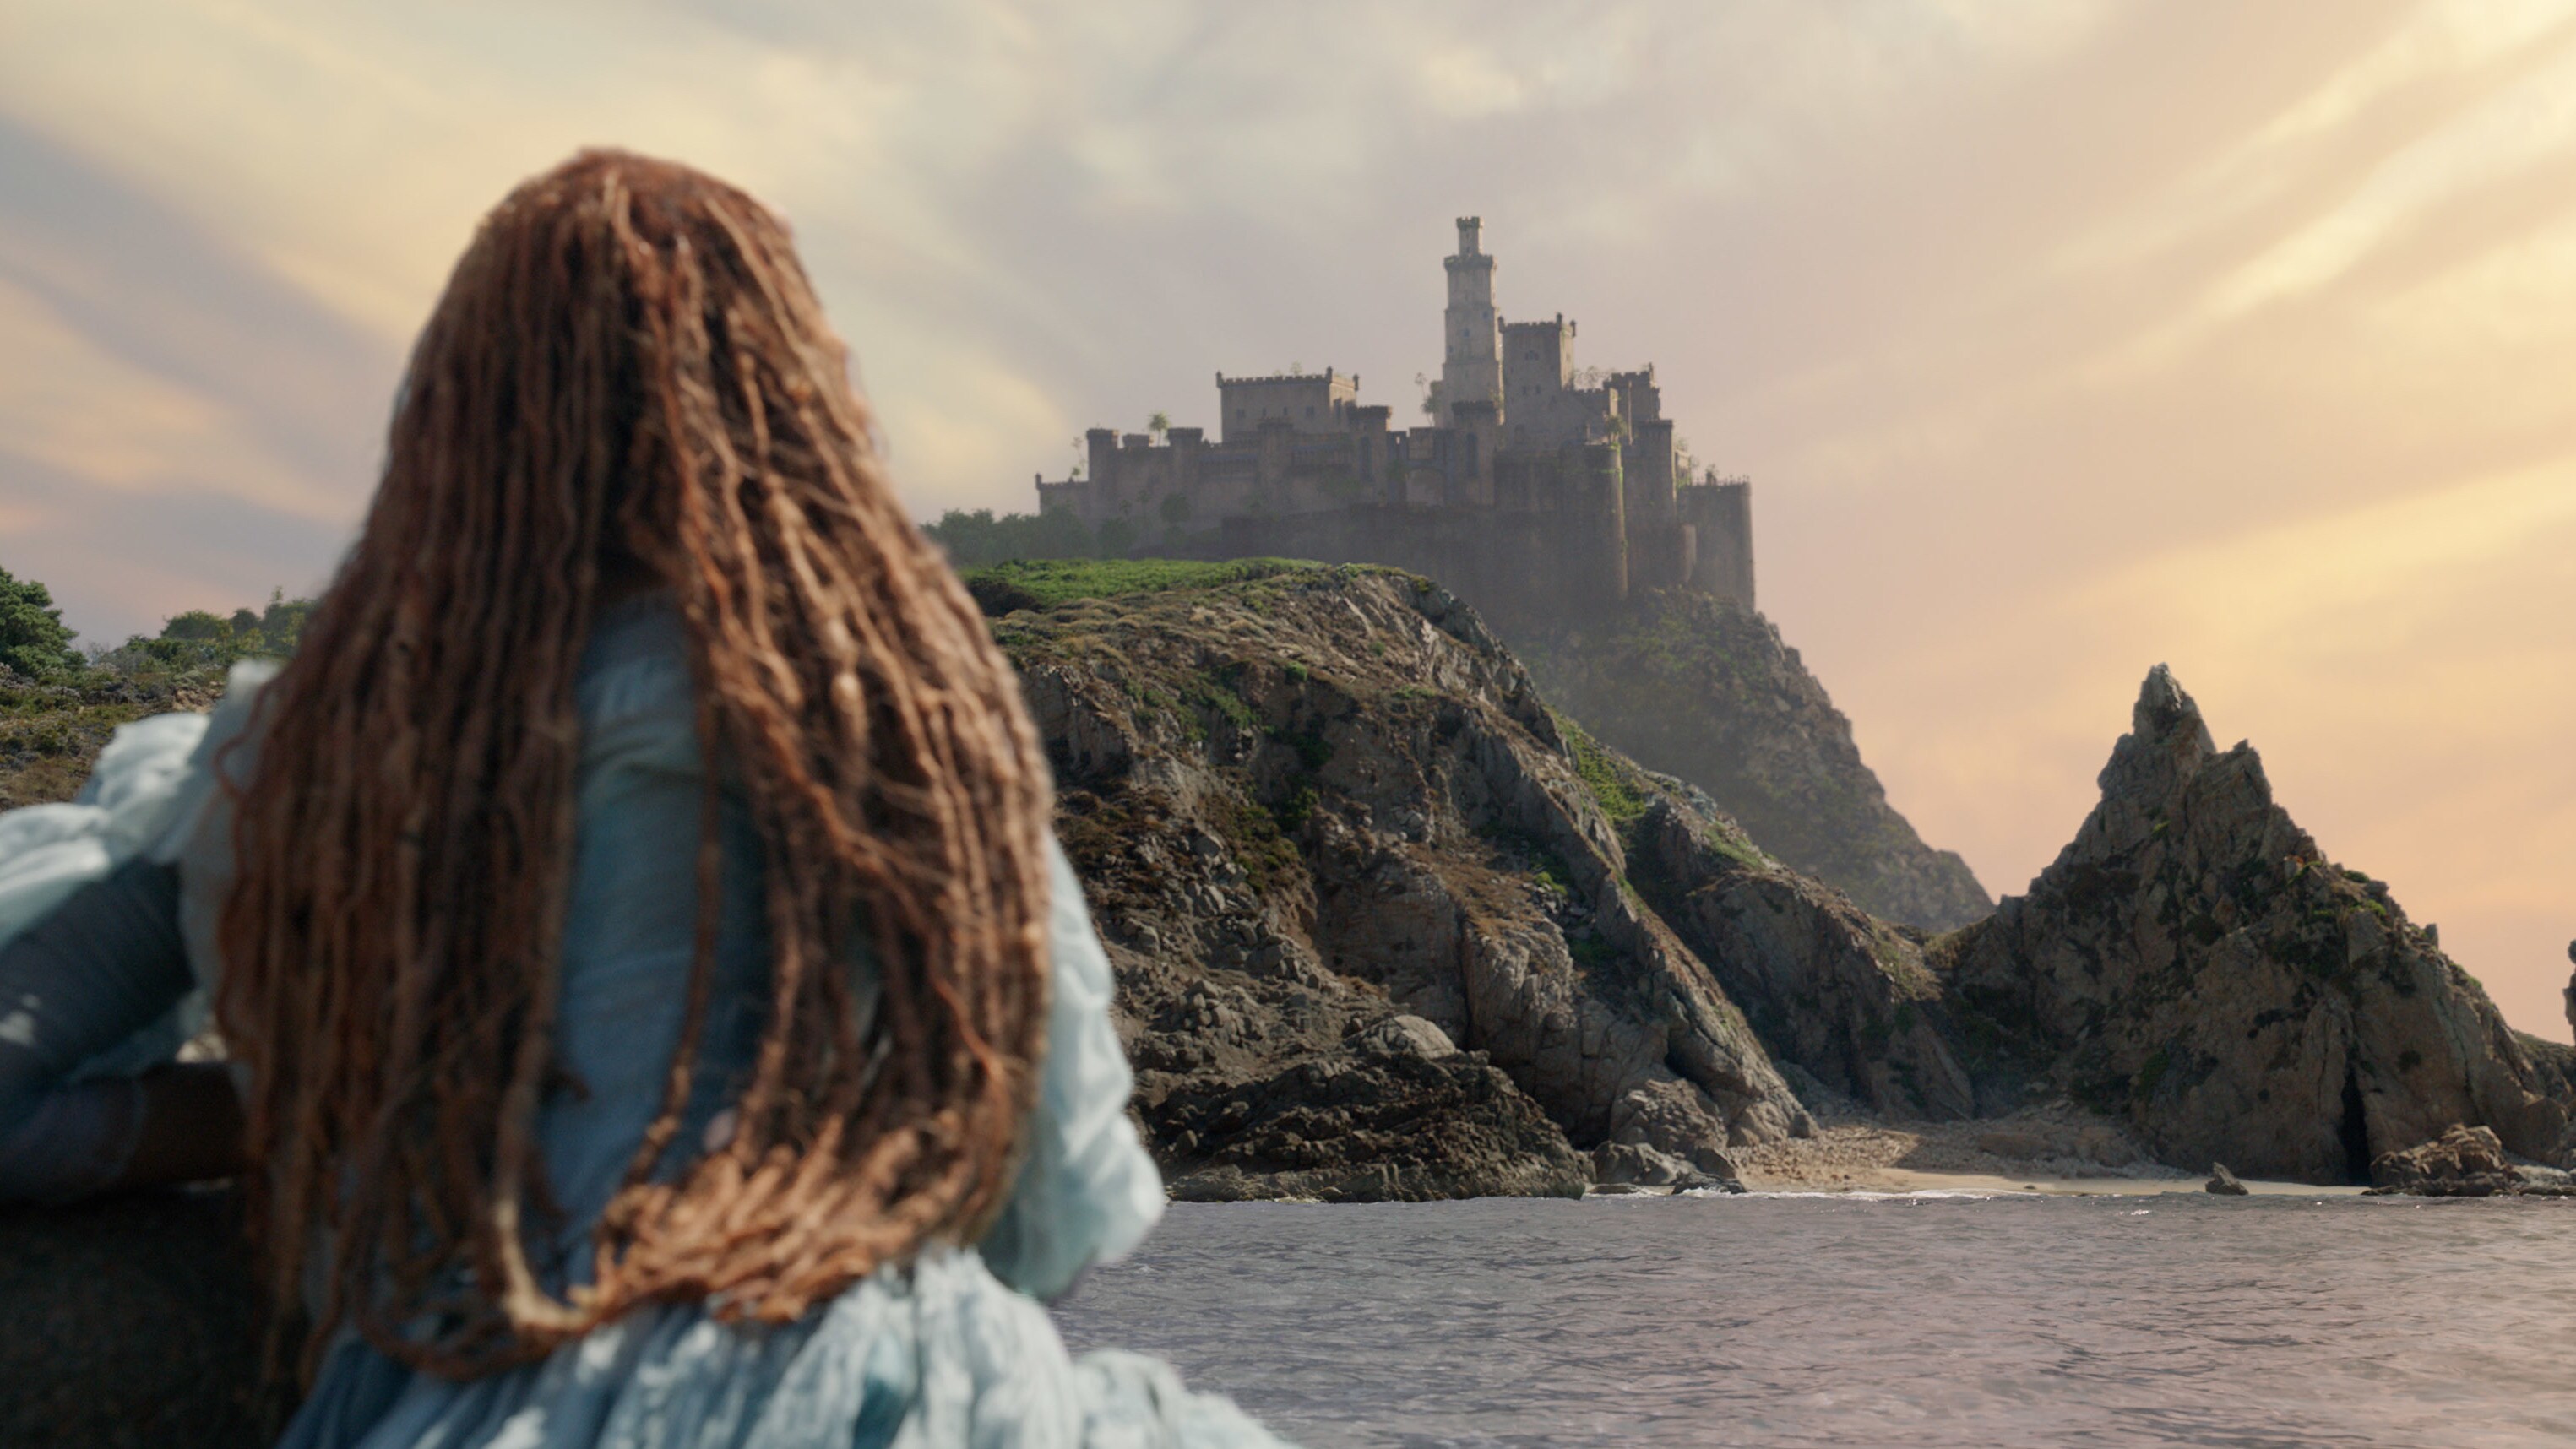 HD wallpaper featuring The Little Mermaid 2023, with a view from behind of a character looking towards a distant castle by the sea under a warm sky, perfect as a desktop background.